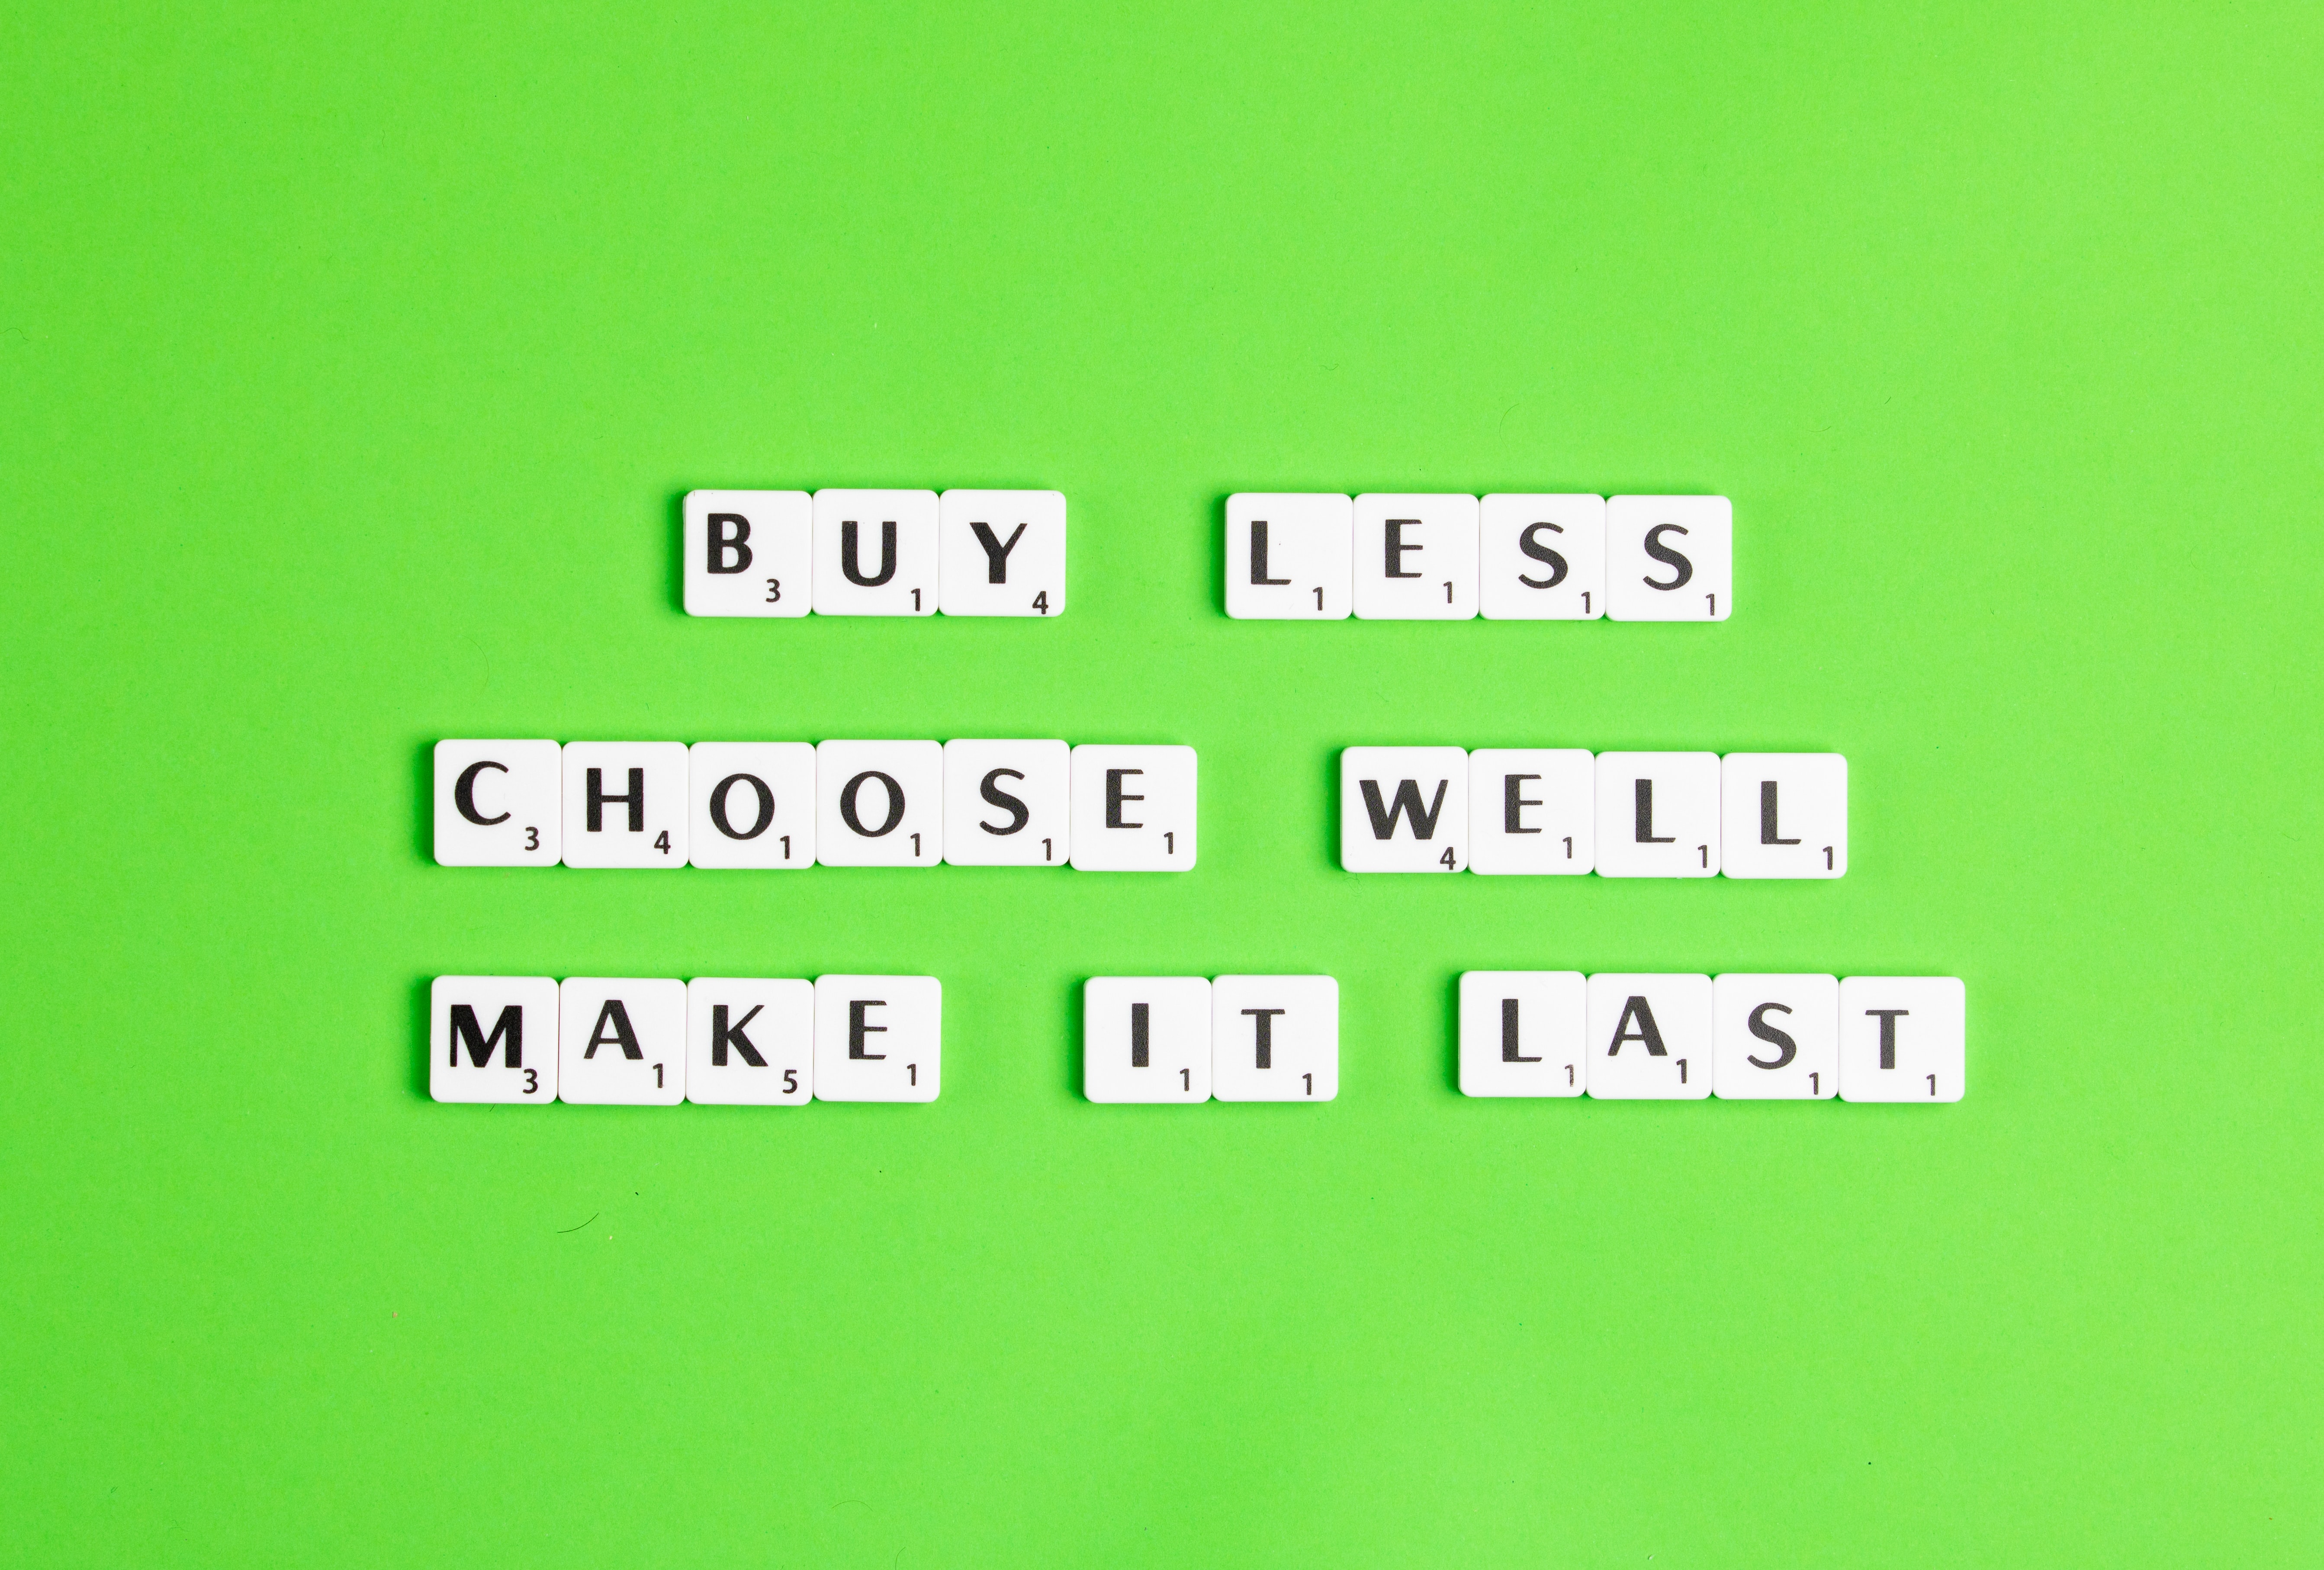 Sentence “Buy Less. Choose well. Make it last.” with letters of the Scrabble game